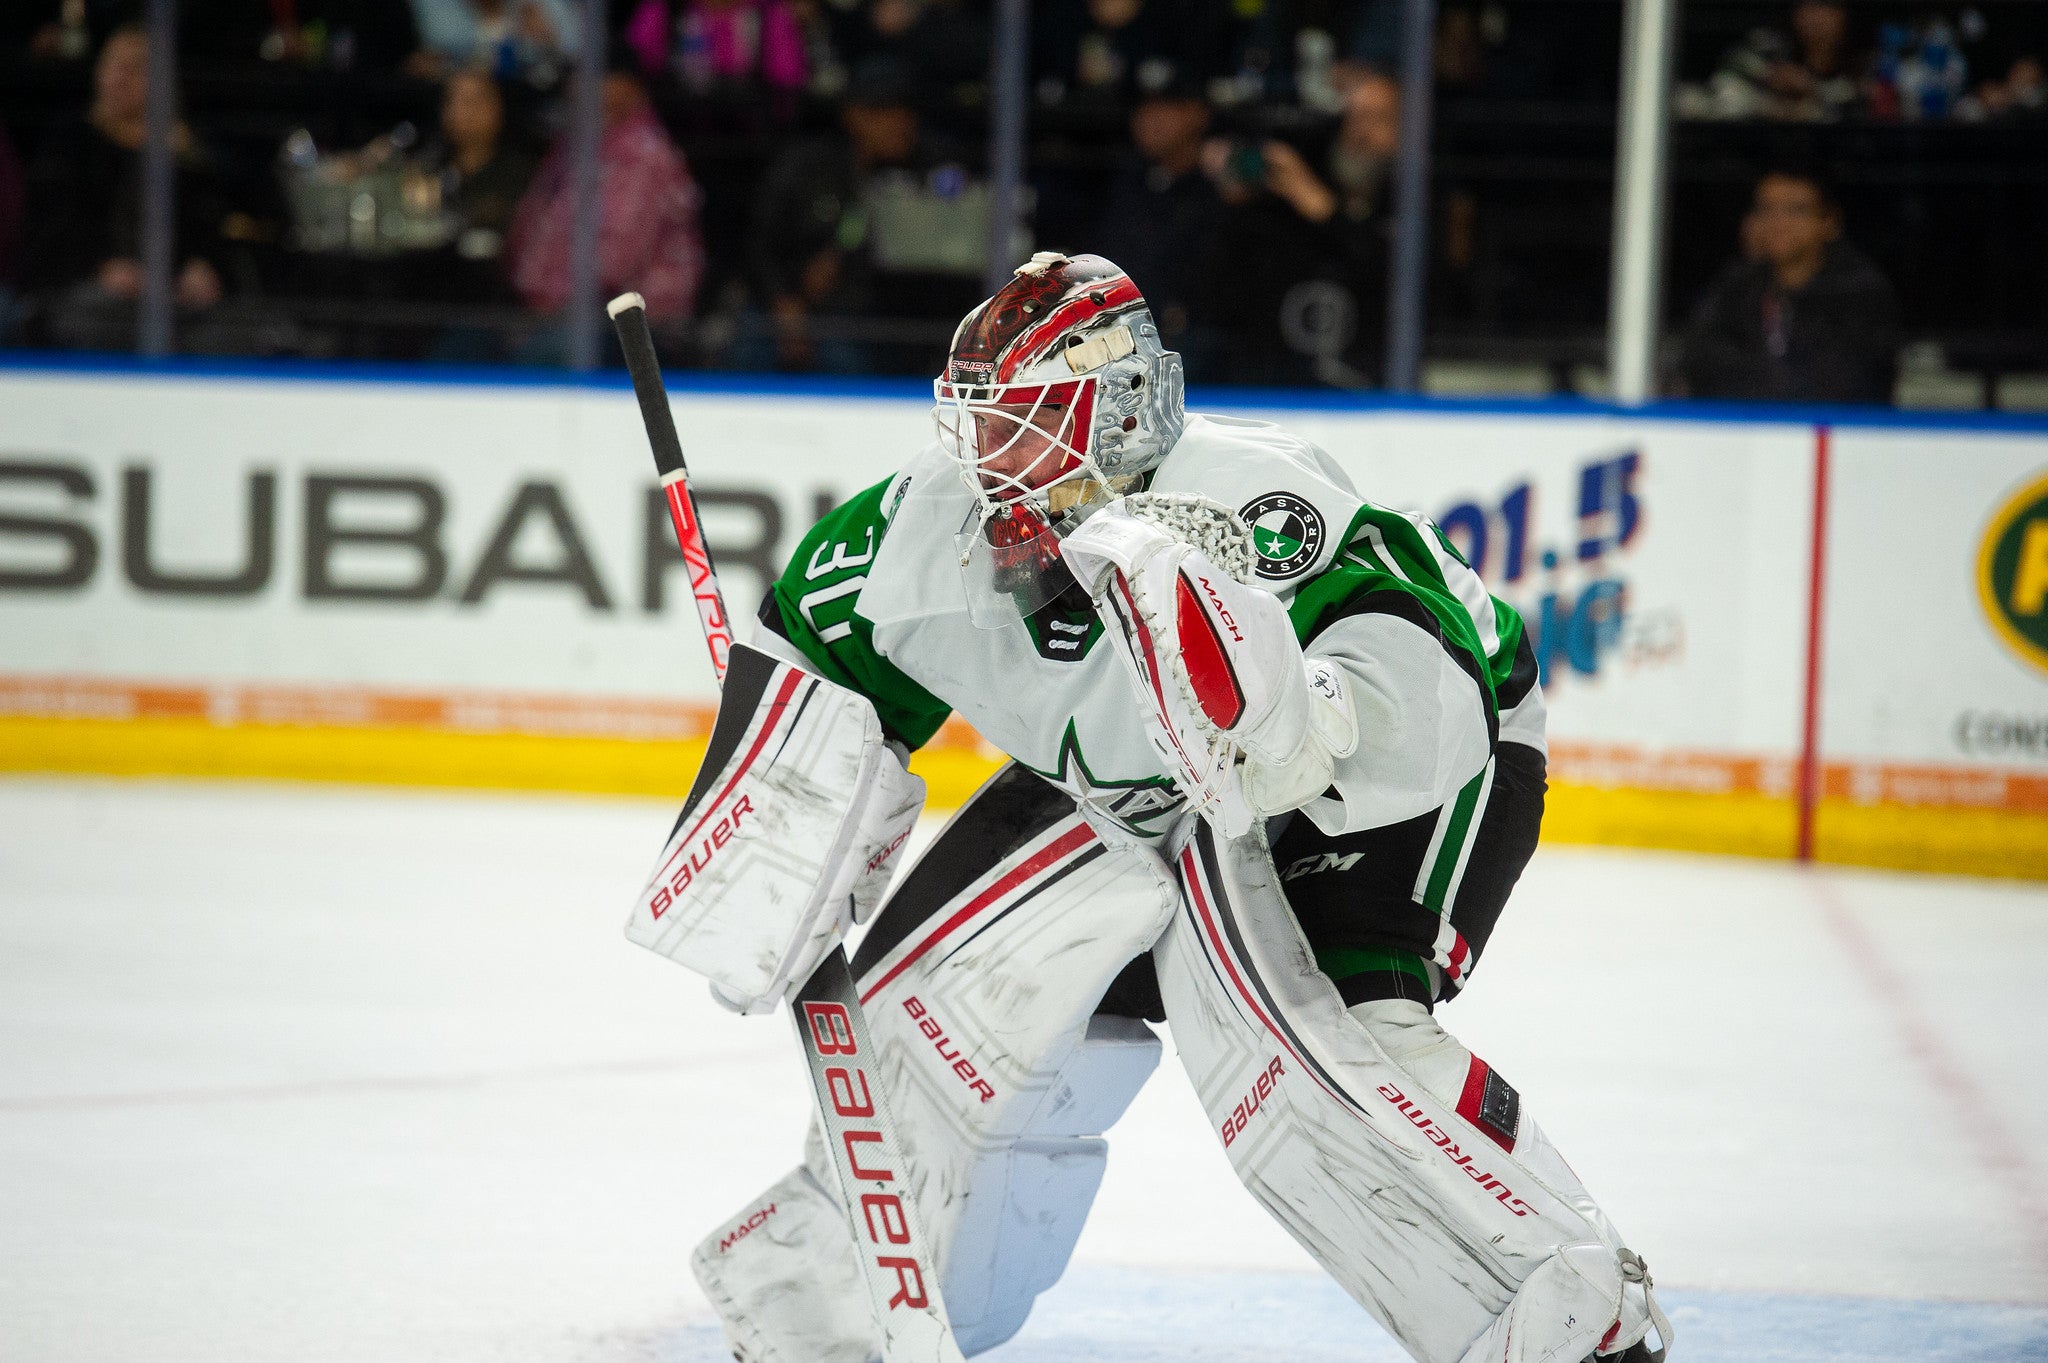 Texas Stars Play Complete Game as Jake Oettinger Shuts Out Griffins 4-0